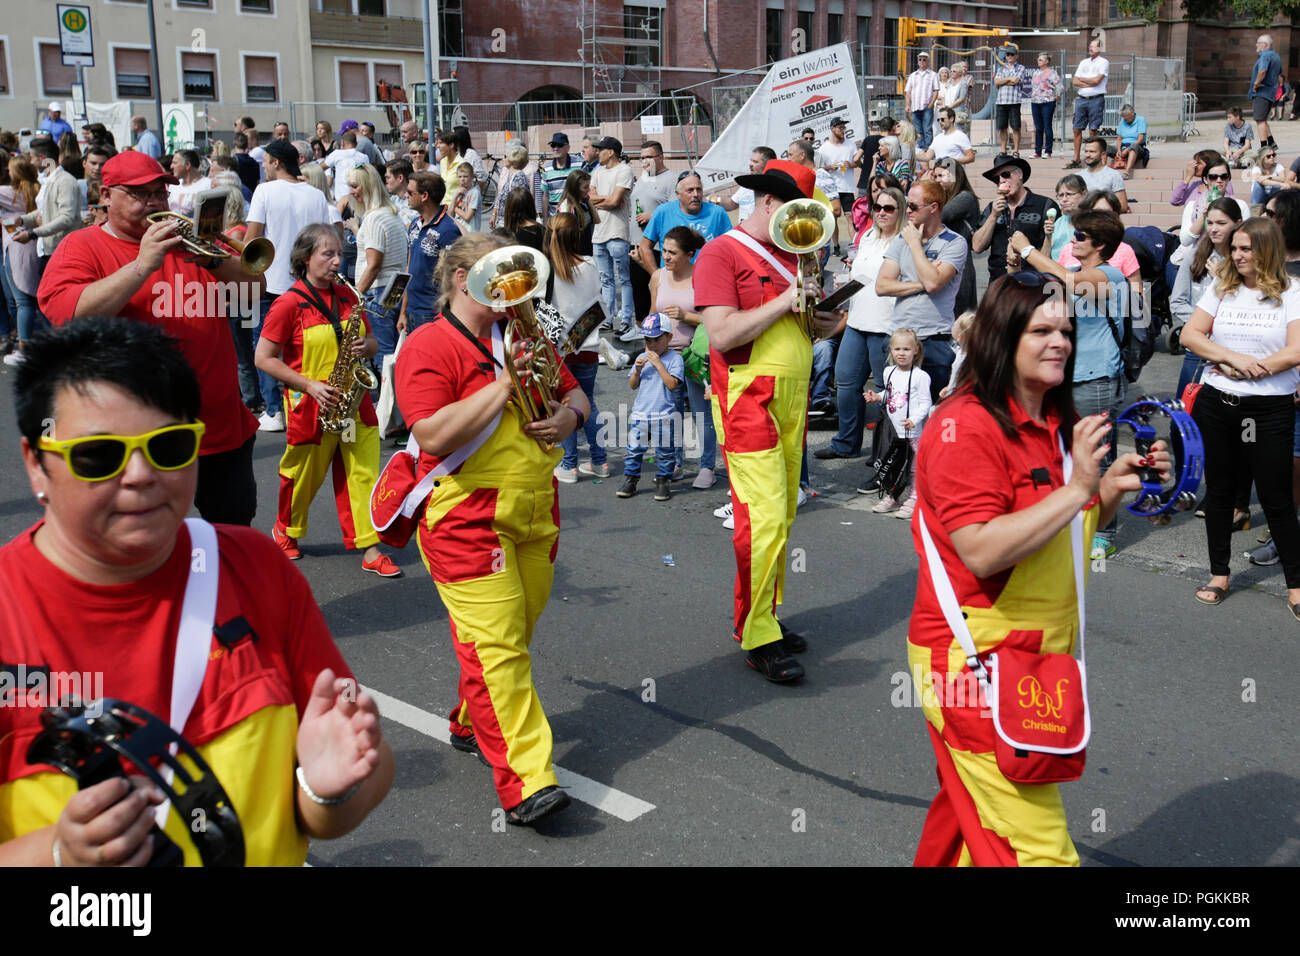 Worms, Germany. 26th Aug, 2018. Members of the Pfalzer-Rhythmusfetzer Landstuhl Guggenmusik band perform in the parade. The first highlight of the 2018 Backfischfest was the big parade through the city of Worms with over 70 groups and floats. Community groups, music groups and businesses from Worms and further afield took part. Credit: Michael Debets/Pacific Press/Alamy Live News Stock Photo